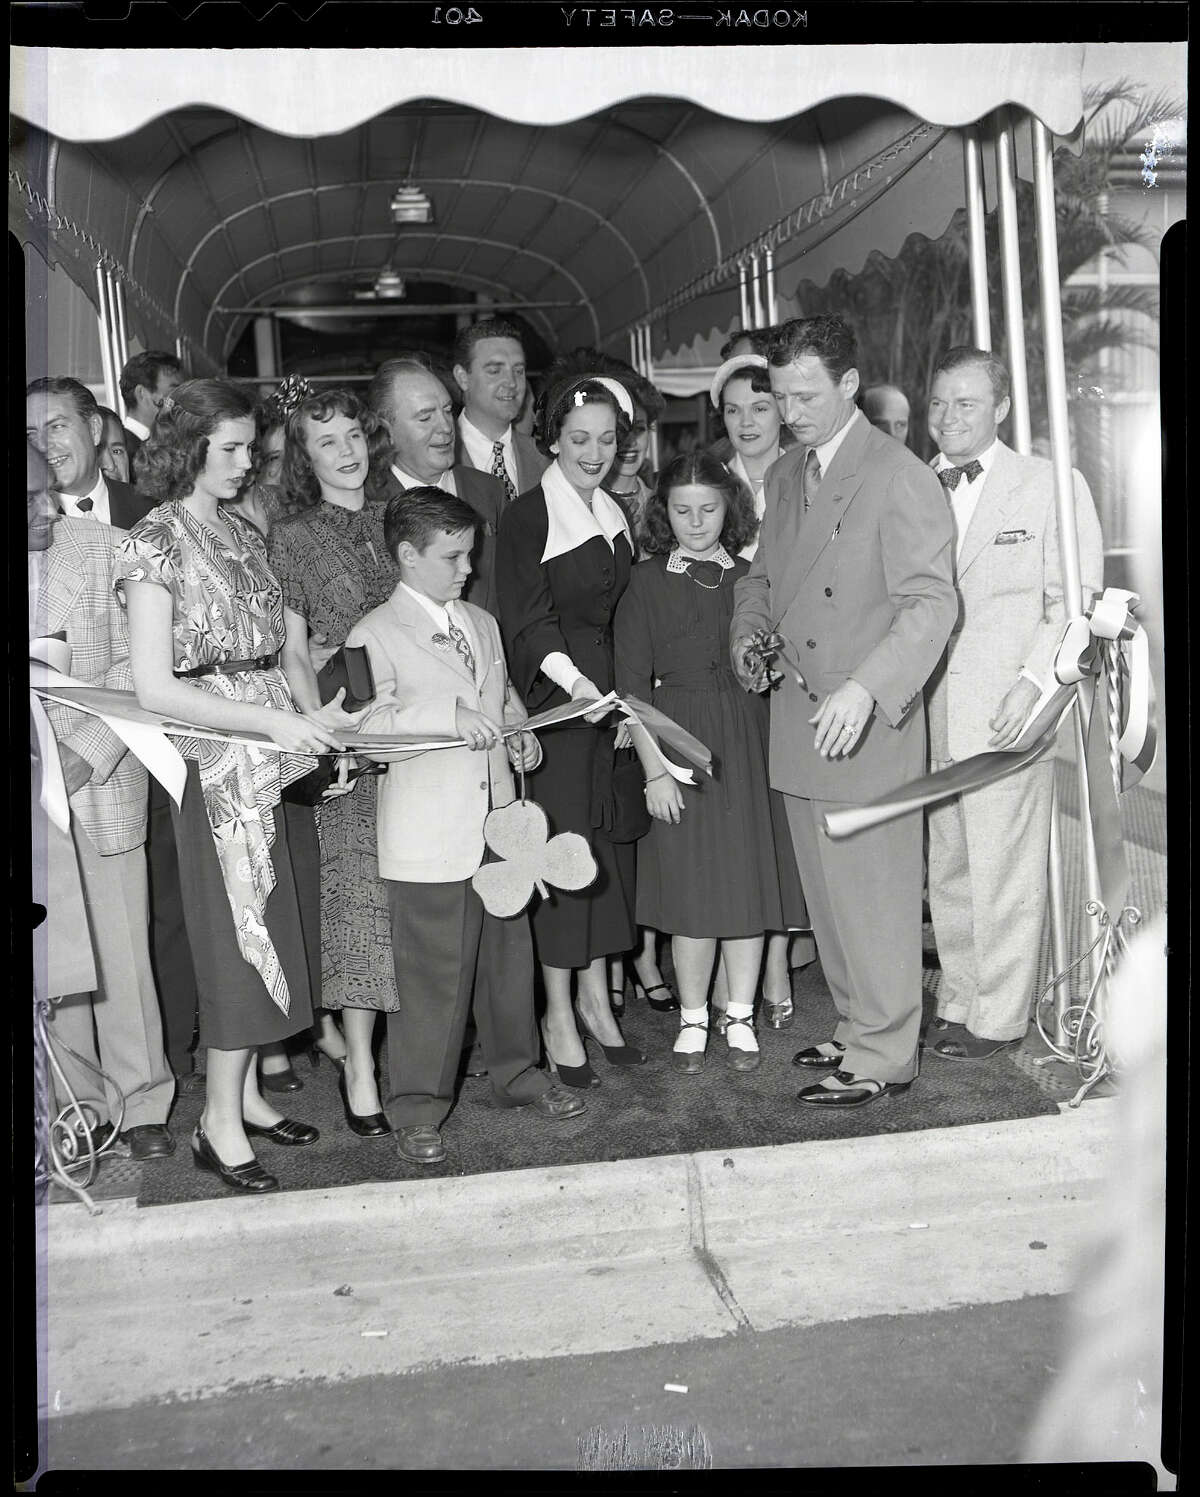 03/17/1949 - Ribbon cutting ceremonies at the grand opening of the Shamrock Hotel. two of Glenn McCarthy's daughters (not sure of order), Mary Margaret McCarthy and Glenna Lee McCarthy are on the left; young Glenn McCarthy Jr.; behind him are entertainer Pat O'Brien and actor Robert Paige; actress Dorothy Lamour; Glenn McCarthy's youngest daughter, Faustine McCarthy; Mrs. Glenn (Faustine) McCarthy; Glenn H. McCarthy holding the scissors.